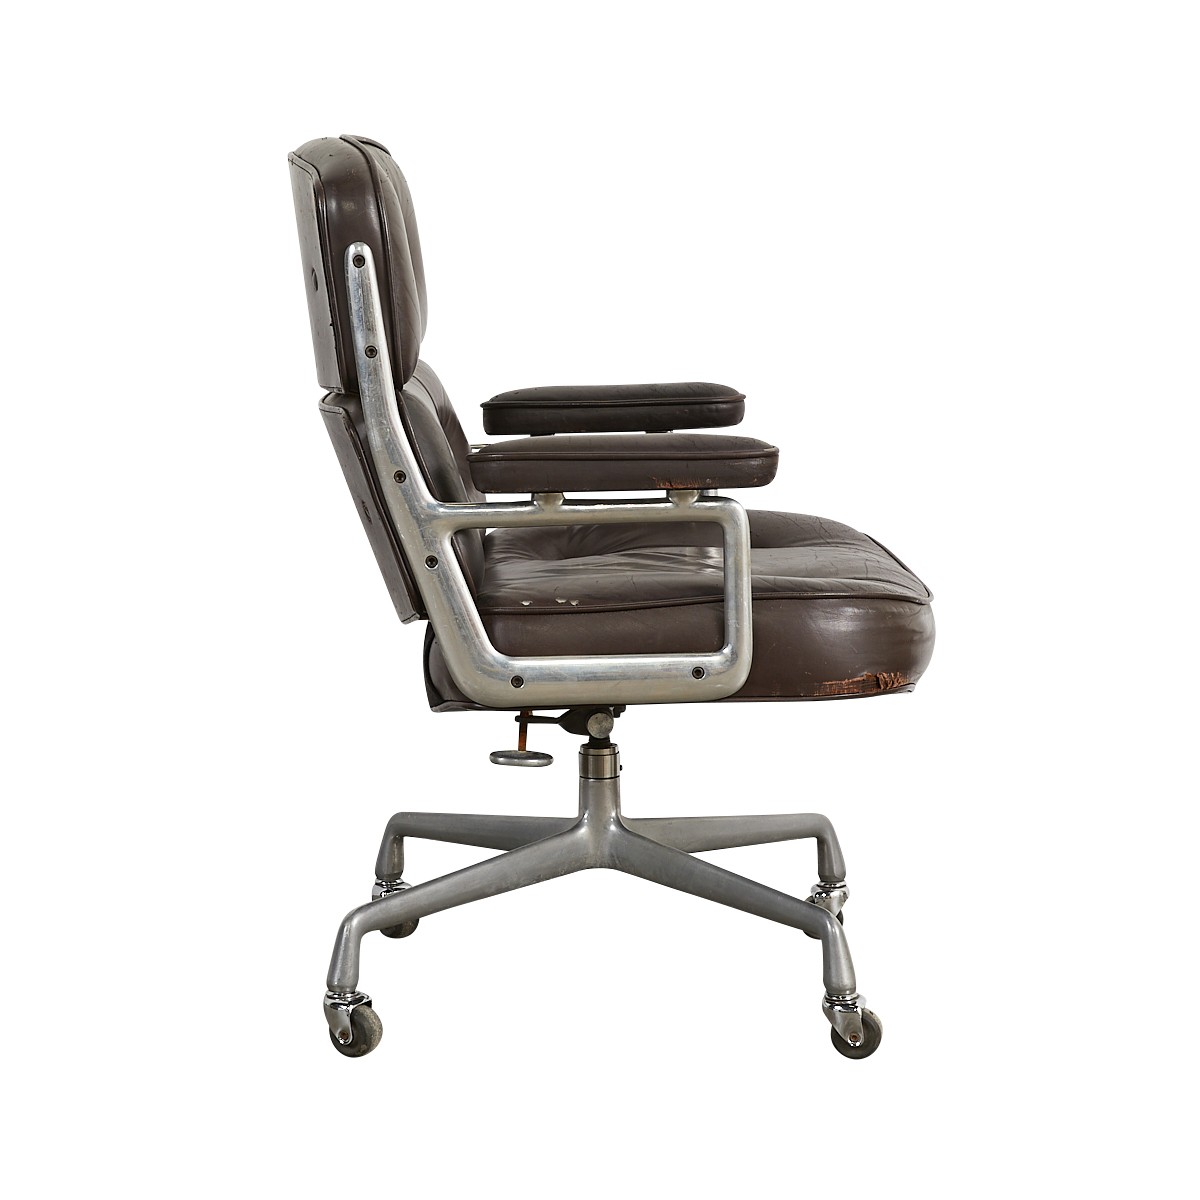 Eames Herman Miller Time Life Chair 1st Gen. - Image 6 of 14